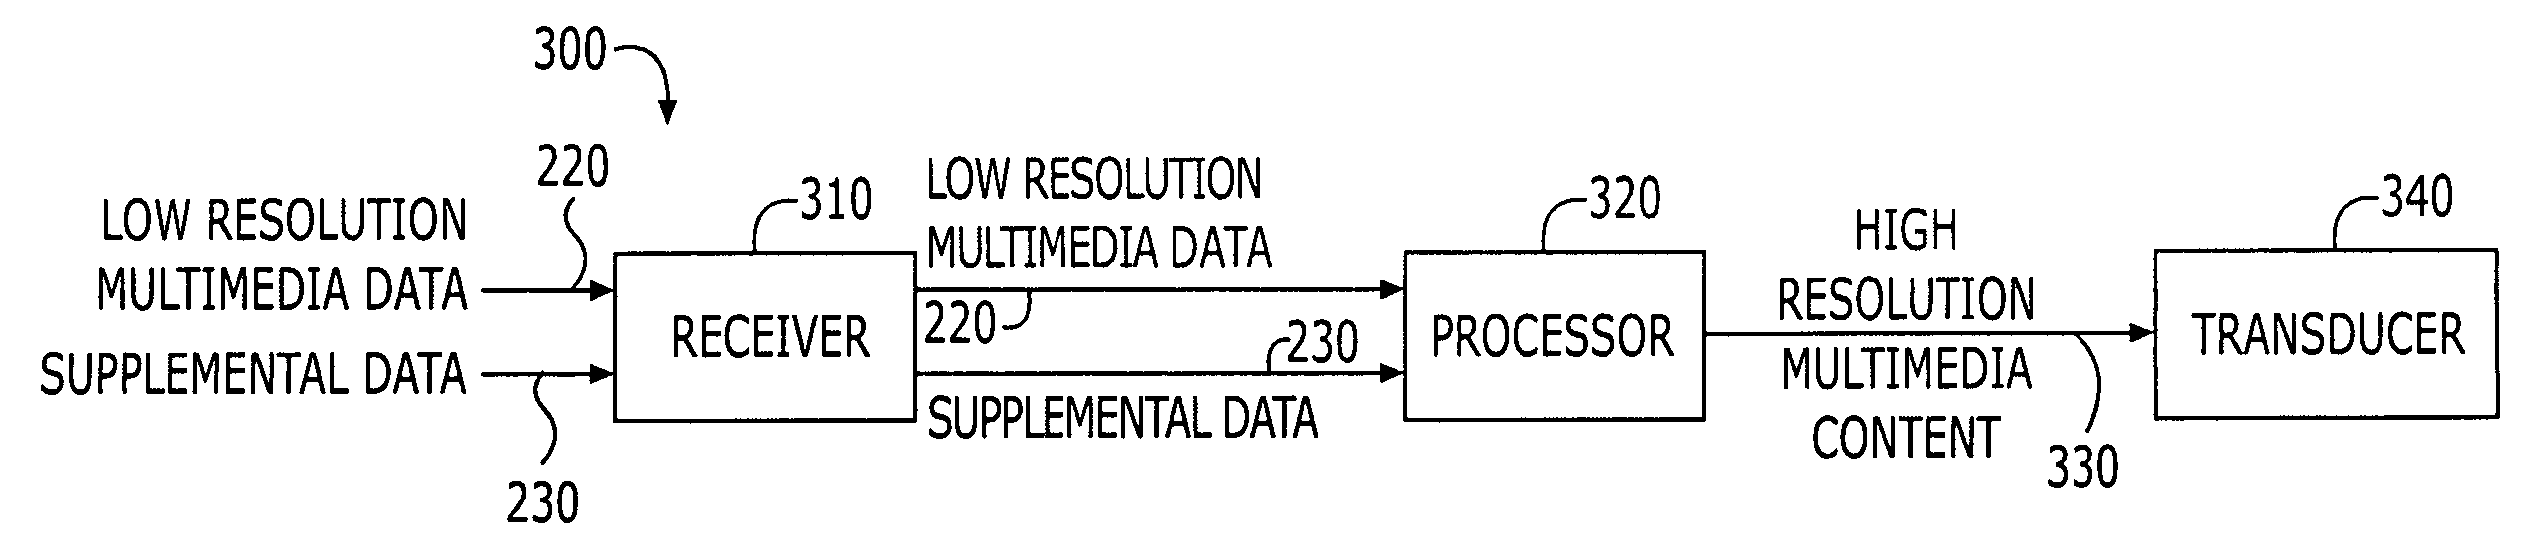 Multimedia distributing and/or playing systems and methods using separate resolution-enhancing supplemental data